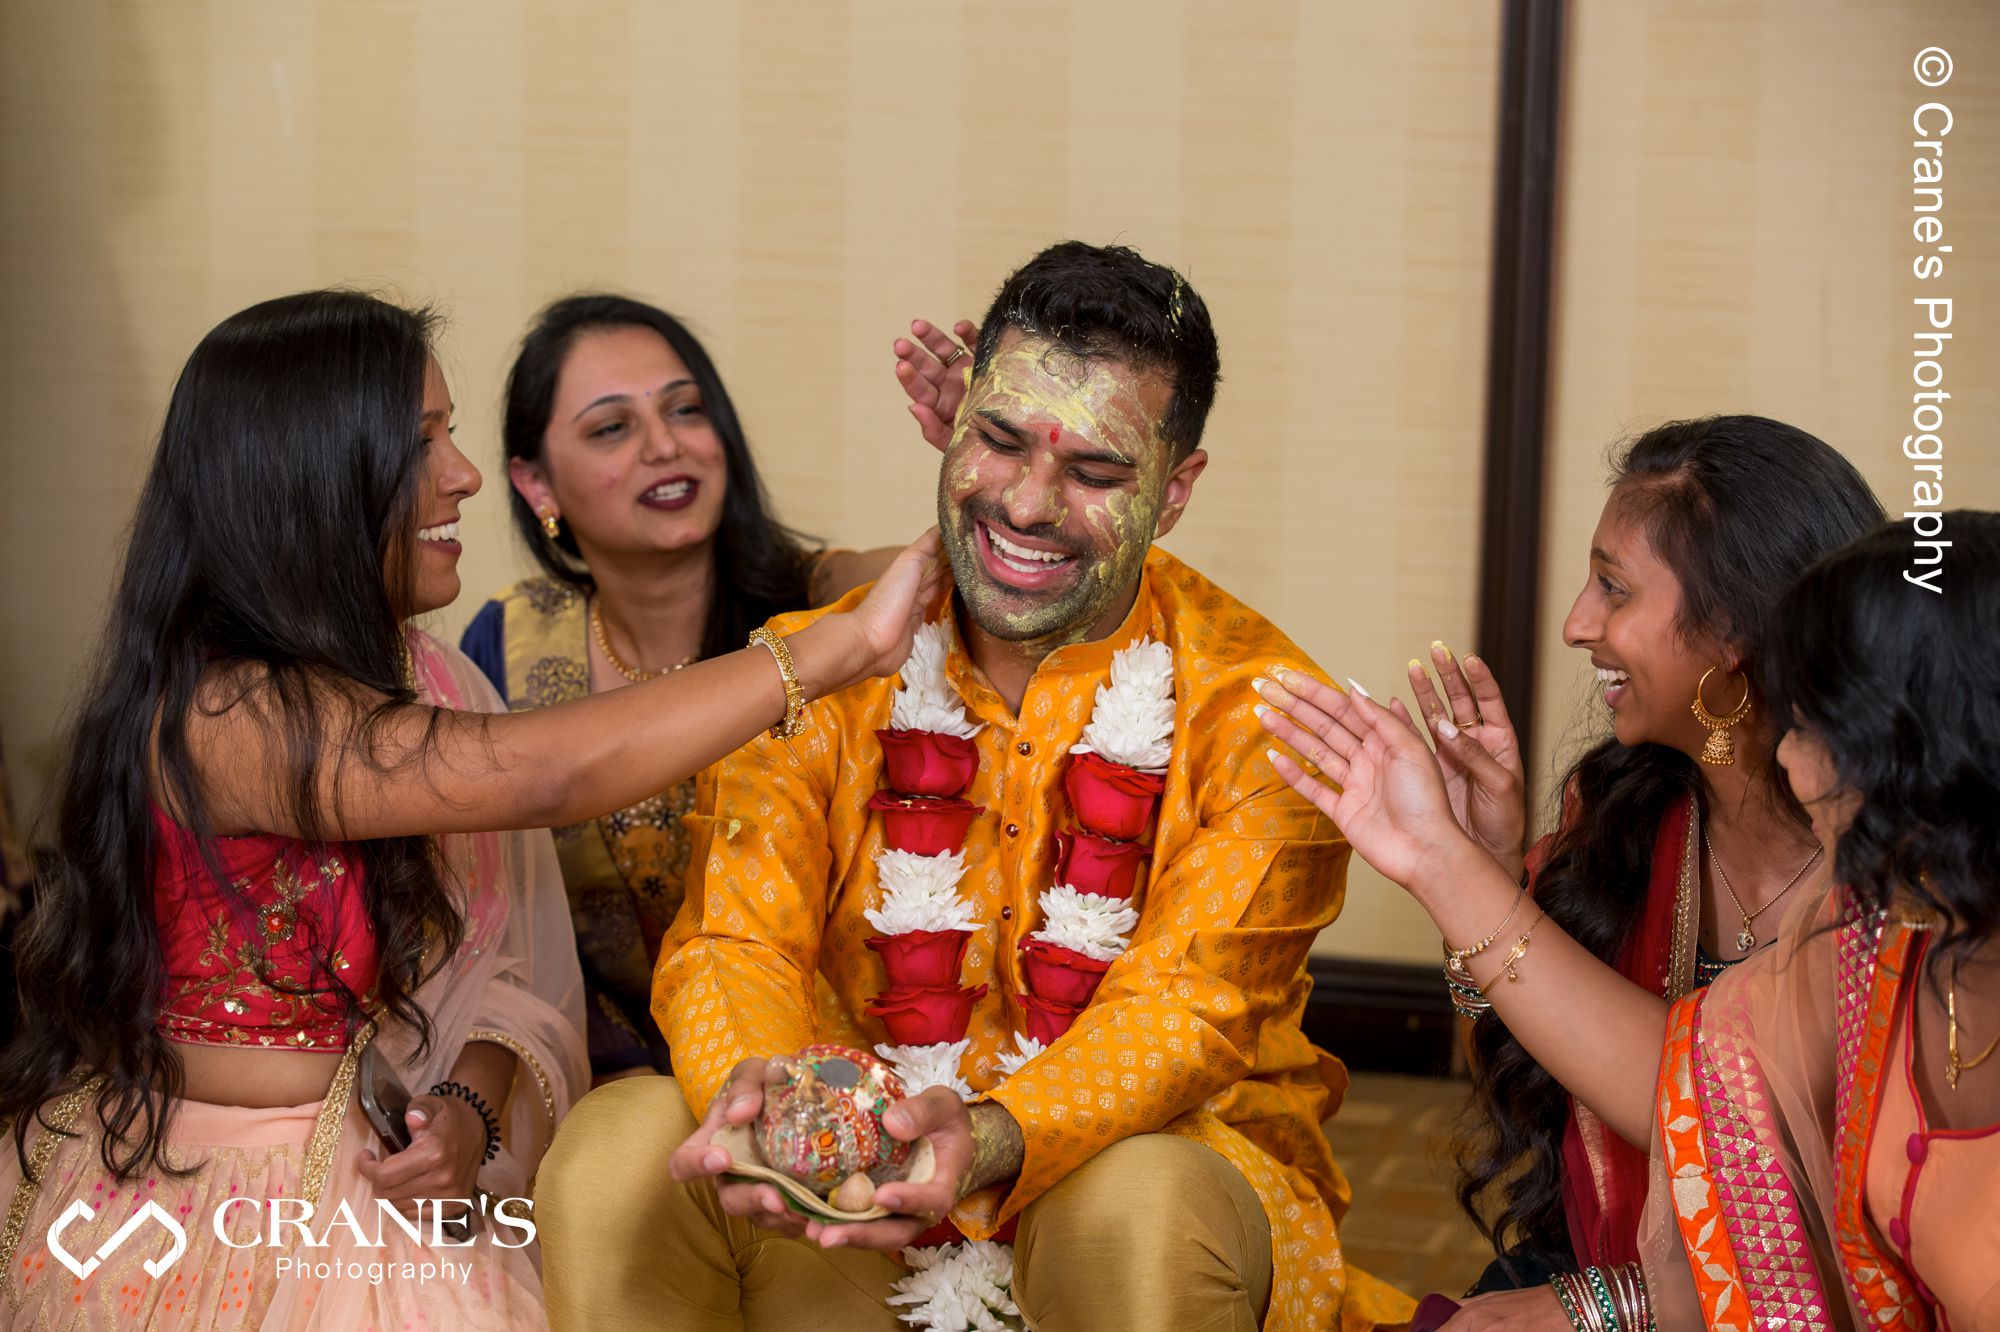 Applying the paste to the groom’s face during Haldi pre-wedding Indian ceremony